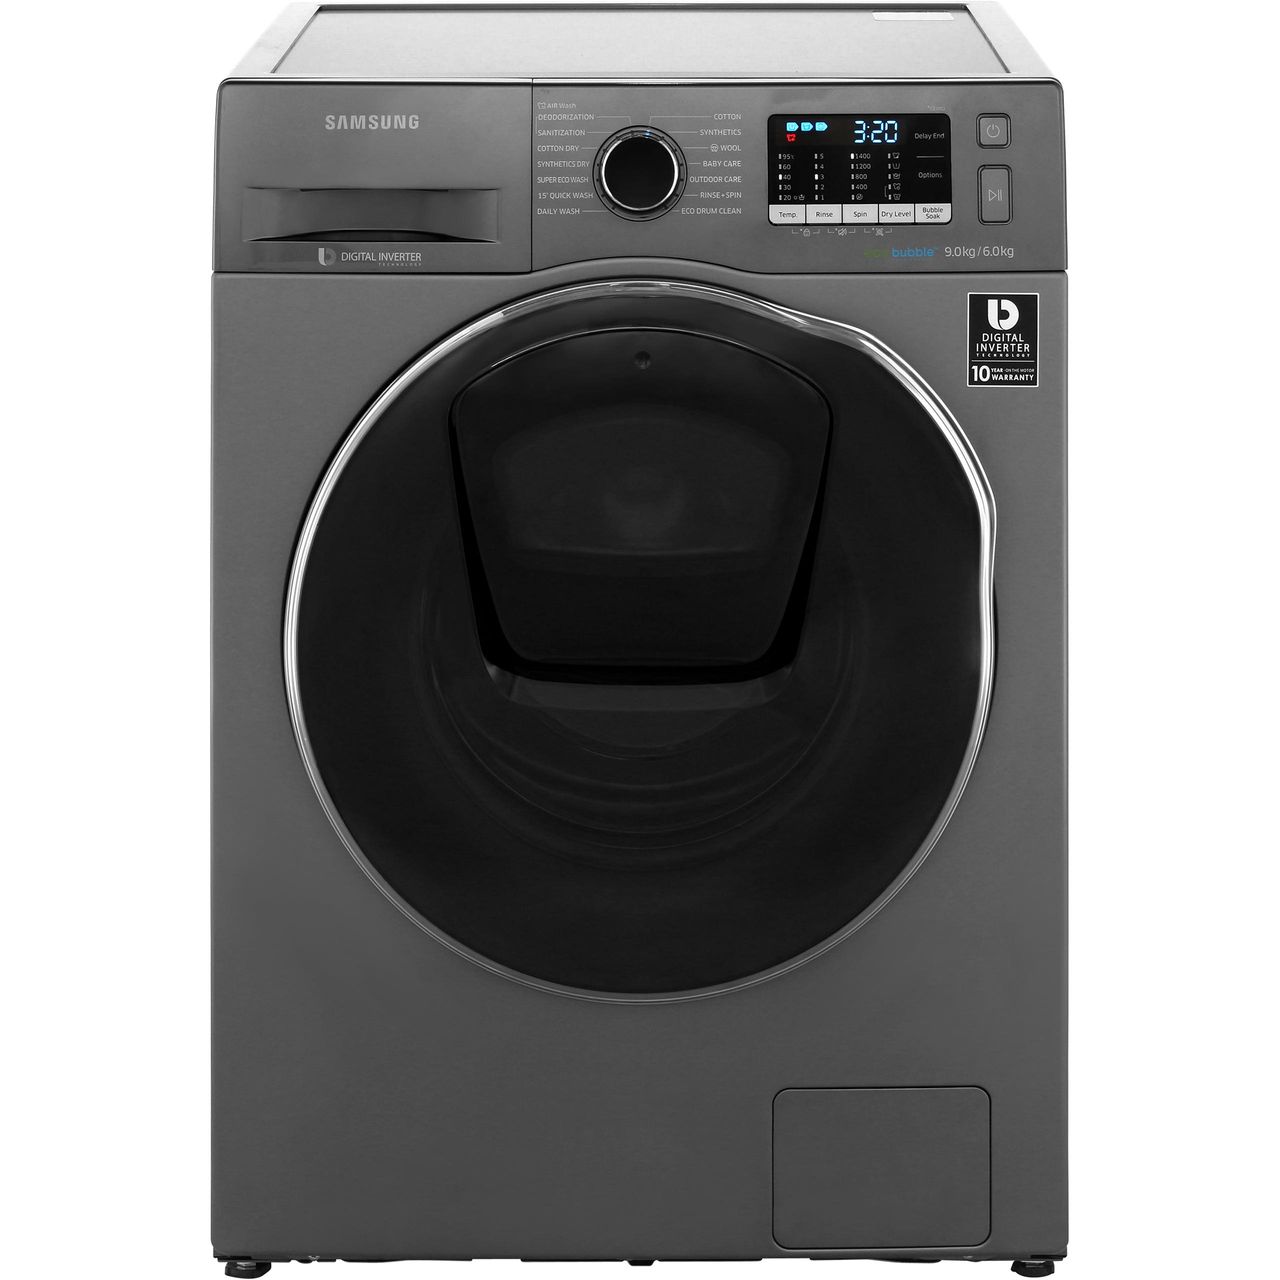 Samsung AddWash™ ecobubble™ WD90K5B10OX 9Kg / 6Kg Washer Dryer with 1400 rpm Review